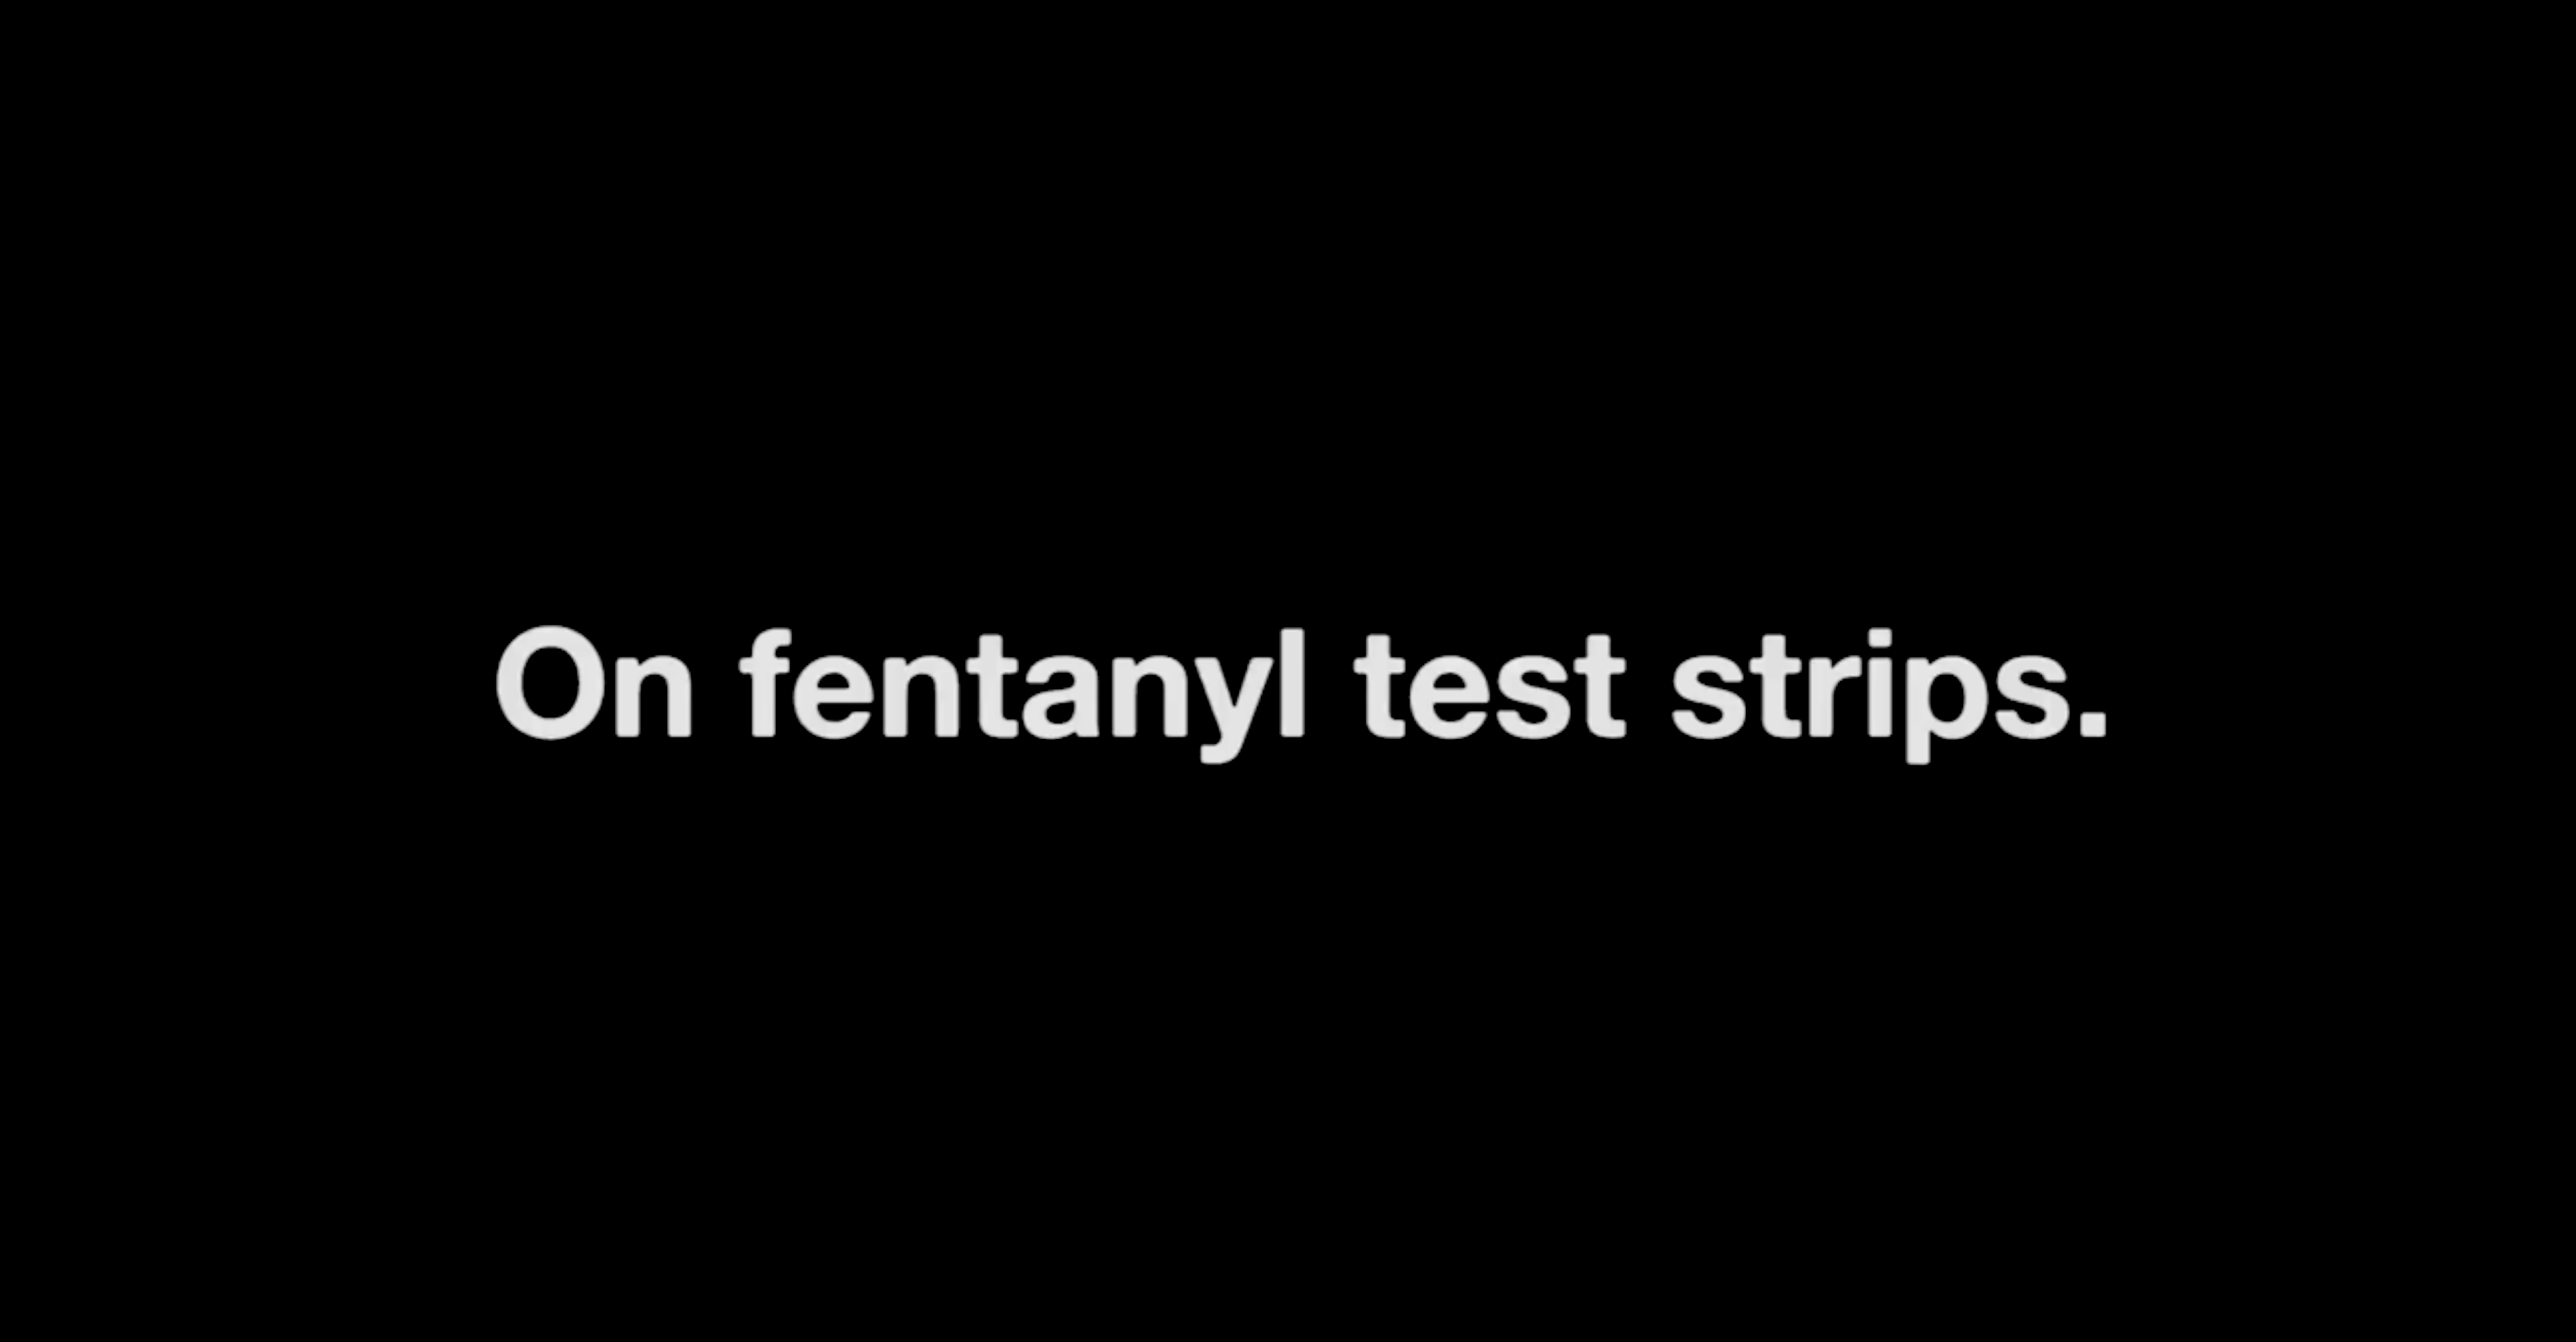 How can you test for fentanyl?